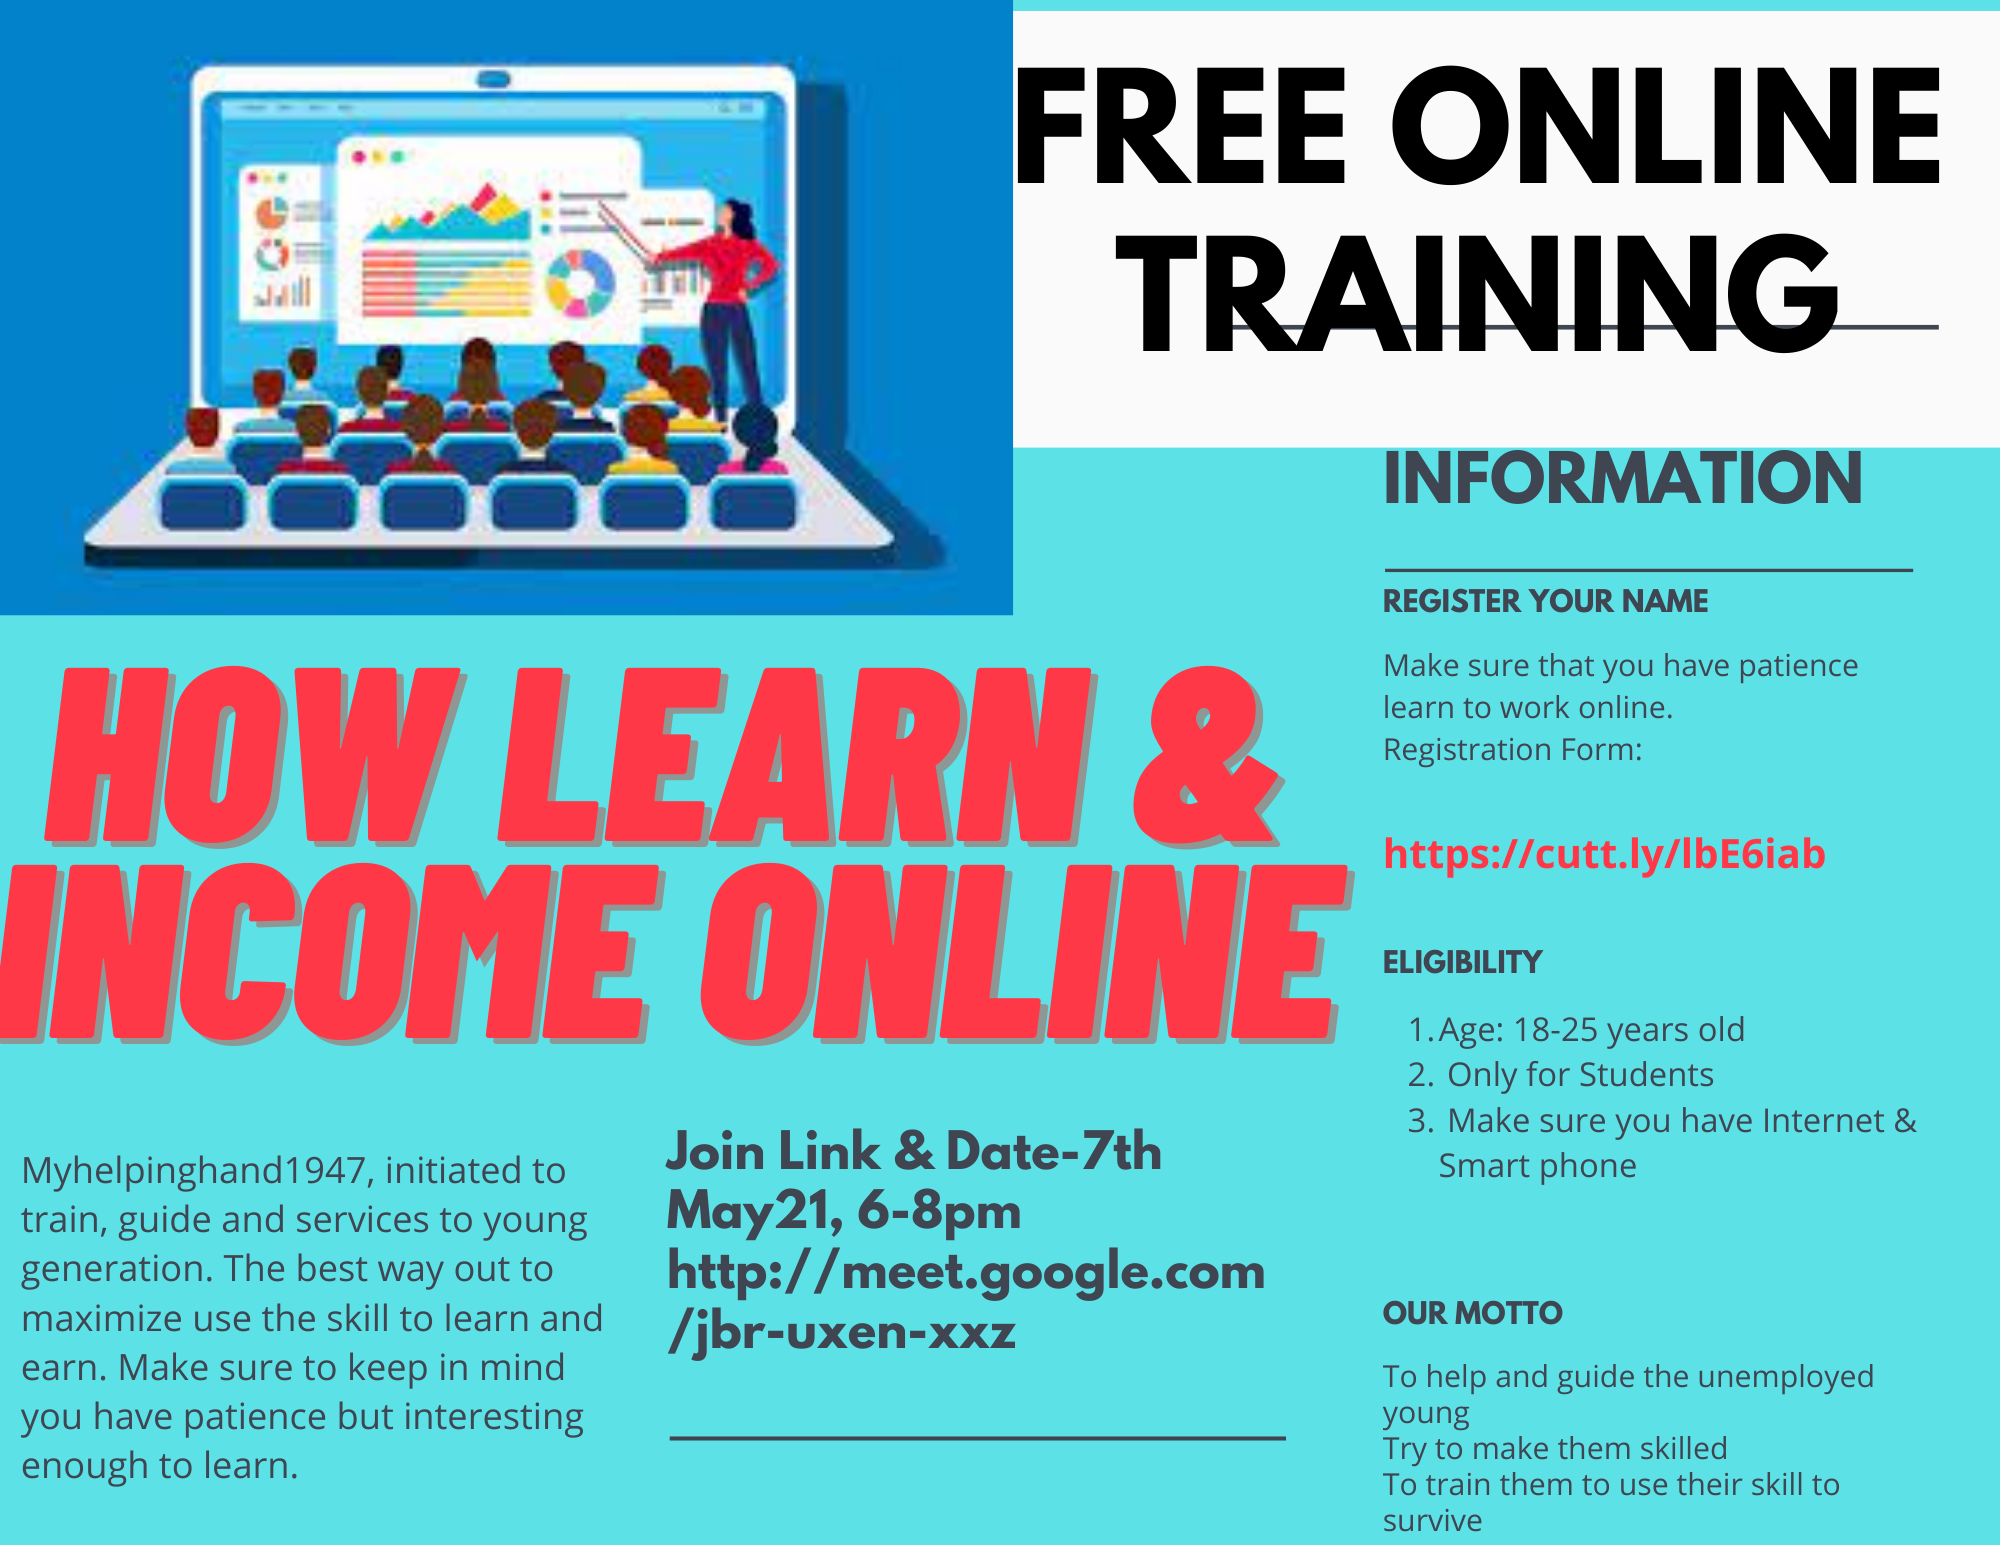 How to learn and Earn online !  How to income from home ! Free Online Training for the young students whose age is 18-25 years old.   To help and guide the unemployed young Try to make them skilled To train them to use their skill to survive    ELIGIBILTY  Age: 18-25 years old Only for Students Make sure you have Internet & Smart phone Myhelpinghand1947, initiated to train, guide and services to young generation. The best way out to maximize use the skill to learn and earn. Make sure to keep in mind you have patience but interesting enough to learn.  Make sure that you have patience learn to work online.  Registration Form: https://cutt.ly/lbE6iab  Motto:  To help and guide the unemployed young  Try to make them skilled  To train them to use their skill to survive